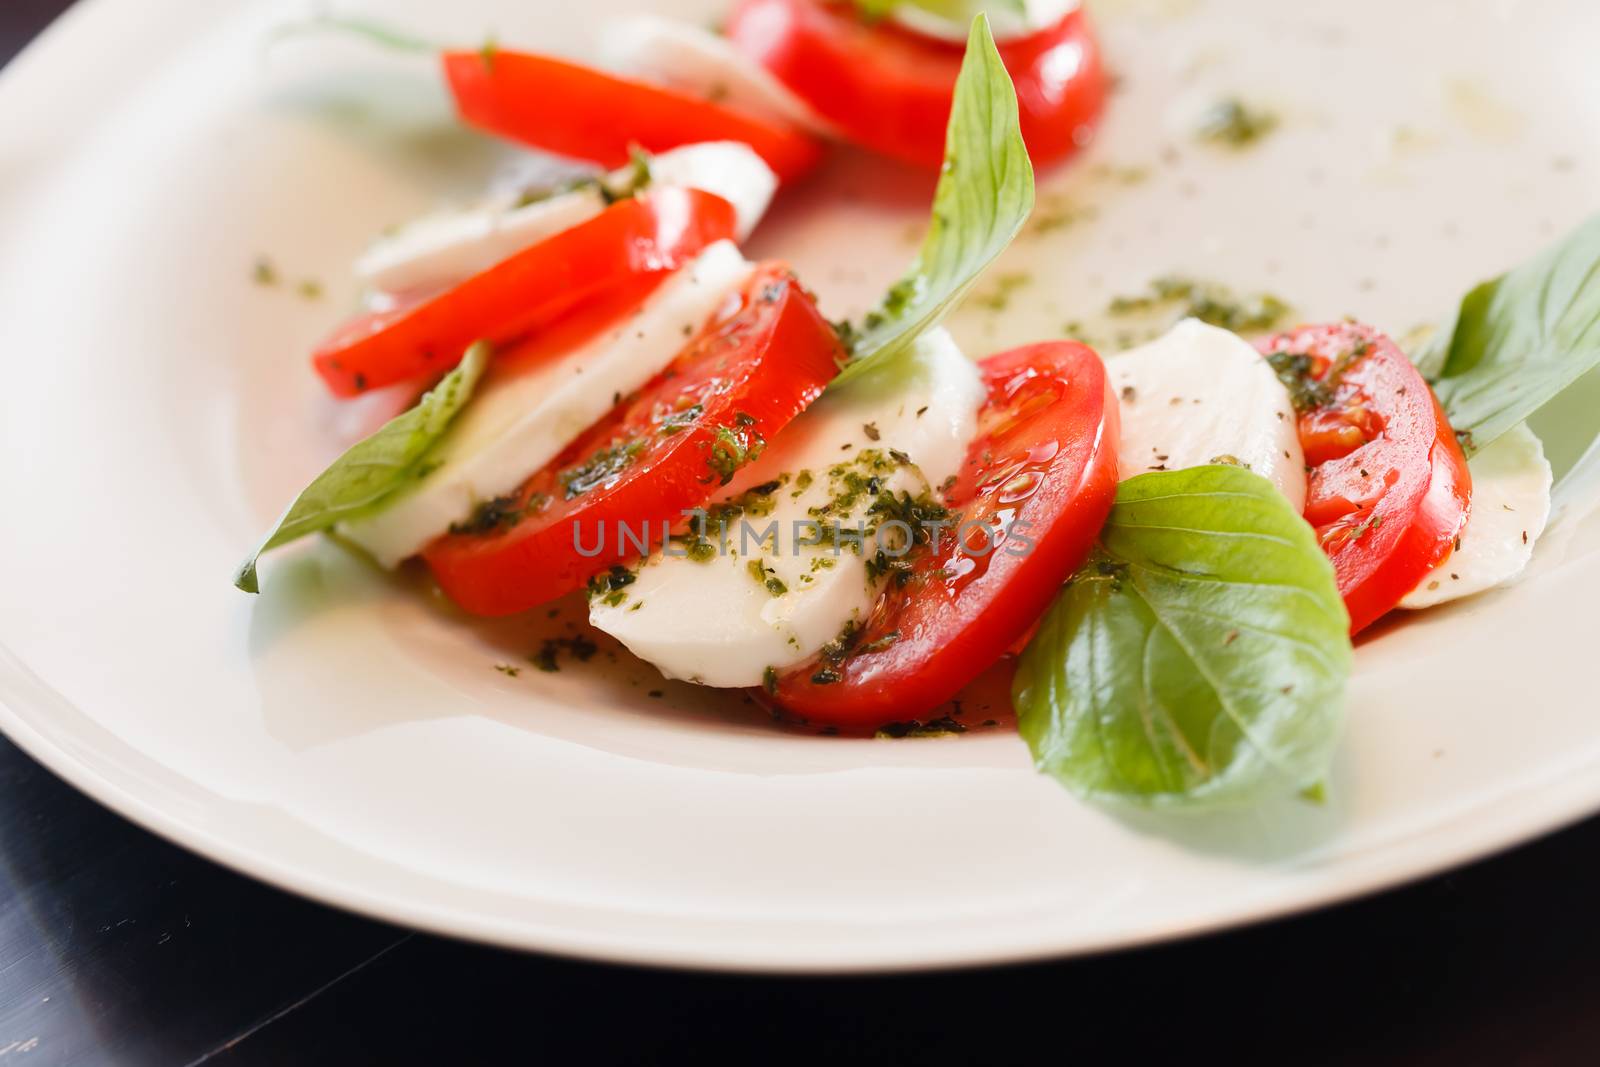 Tomato and mozzarella with basil leaves  by shebeko